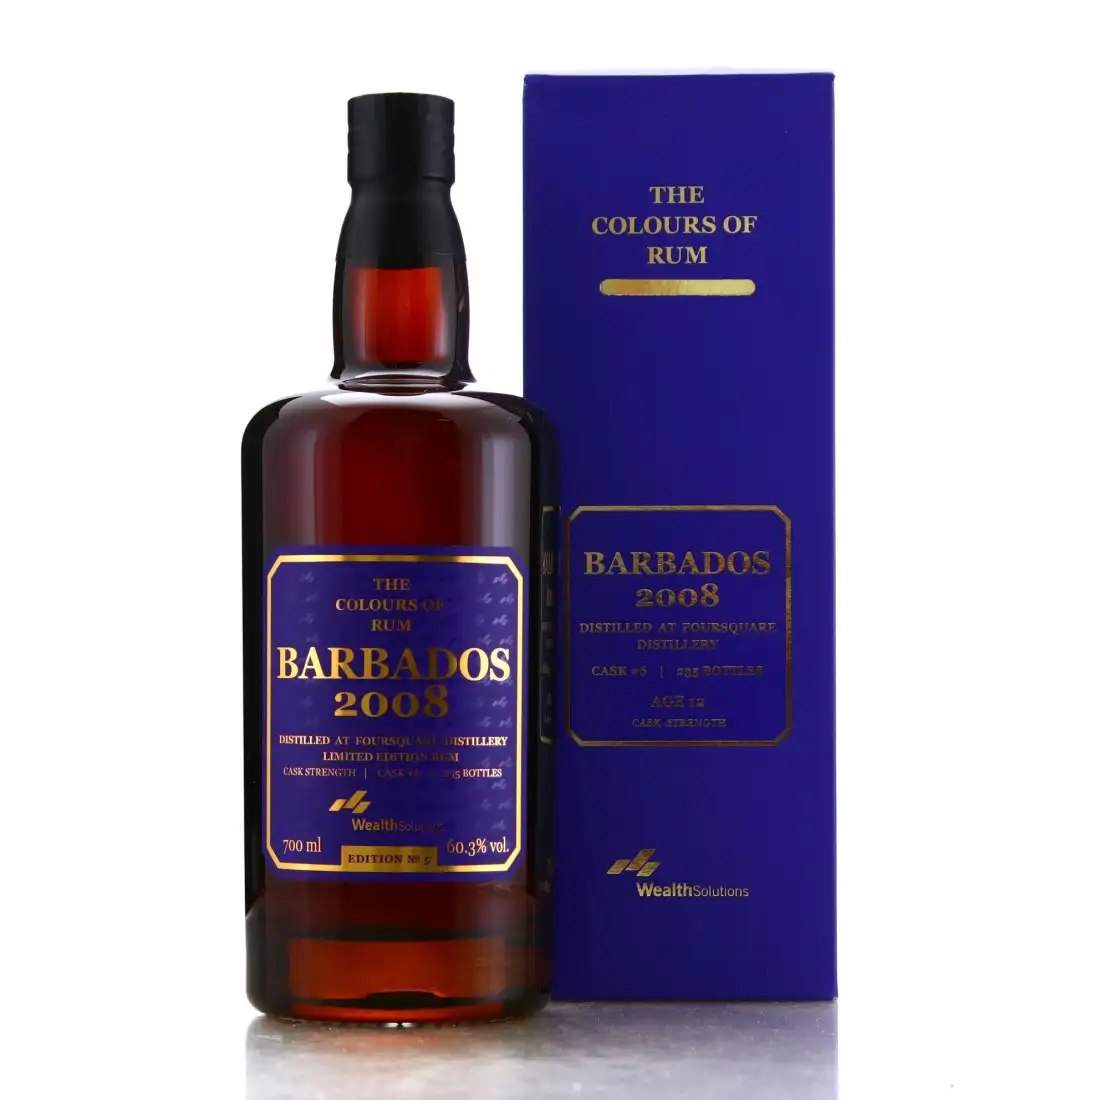 Image of the front of the bottle of the rum Barbados No. 5